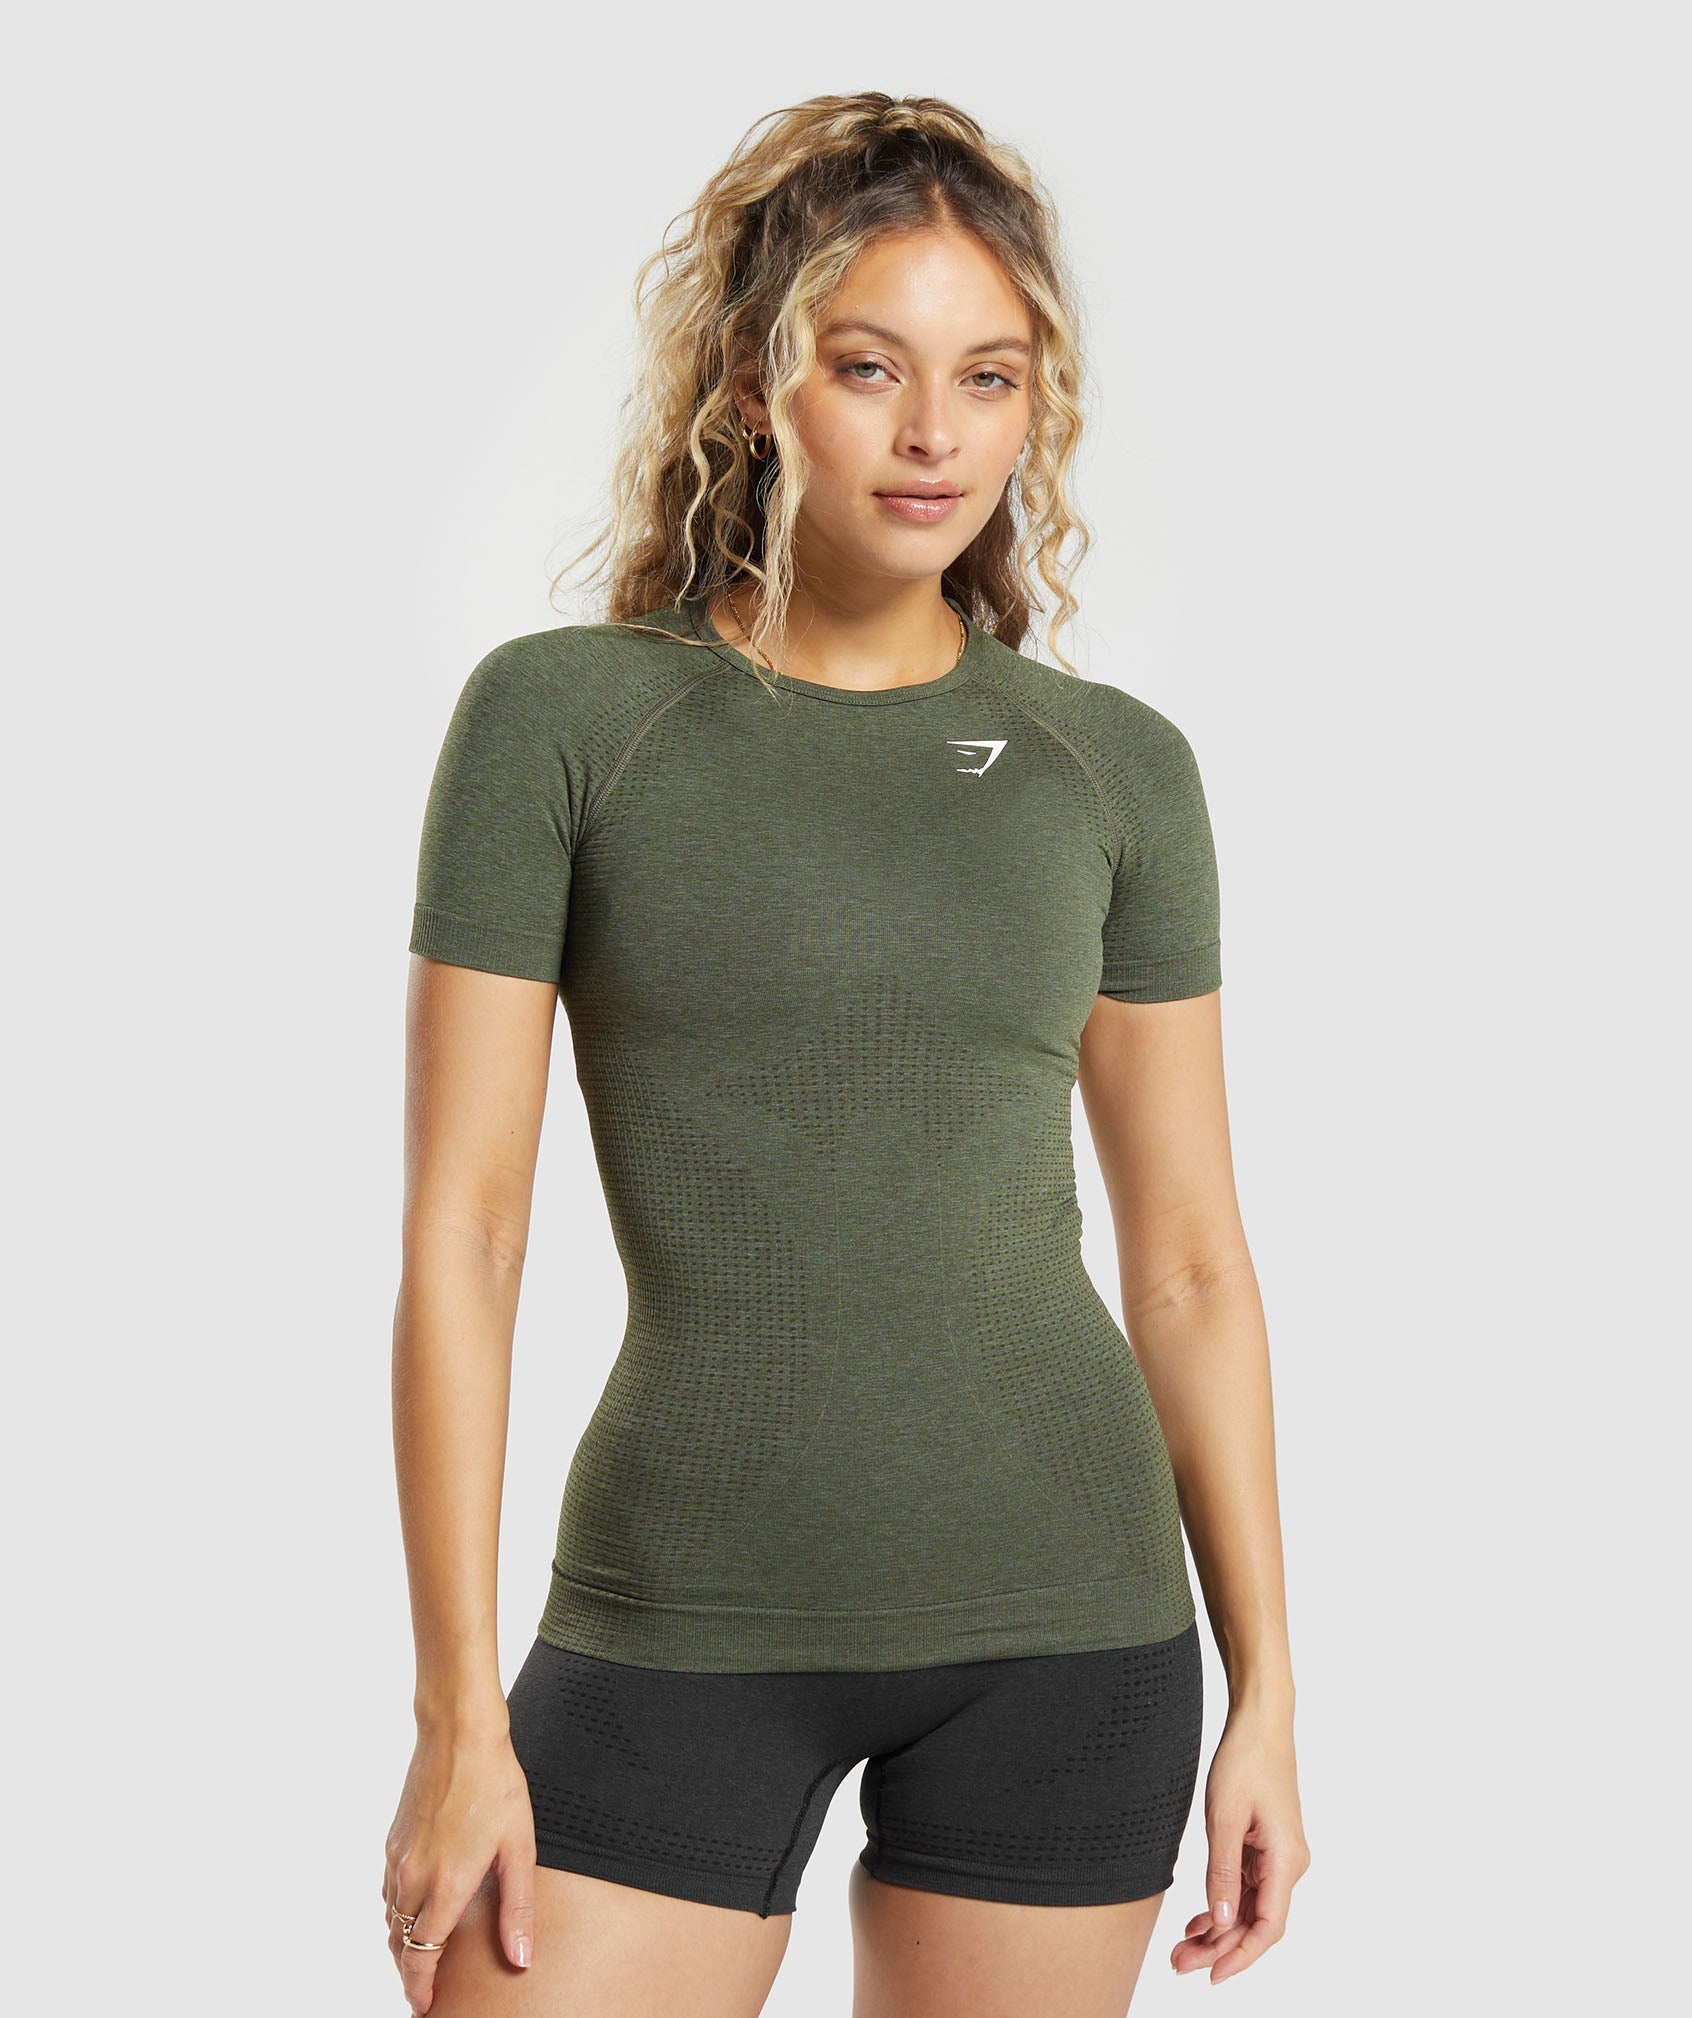 Vital Seamless 2.0 T-Shirt in {{variantColor} is out of stock